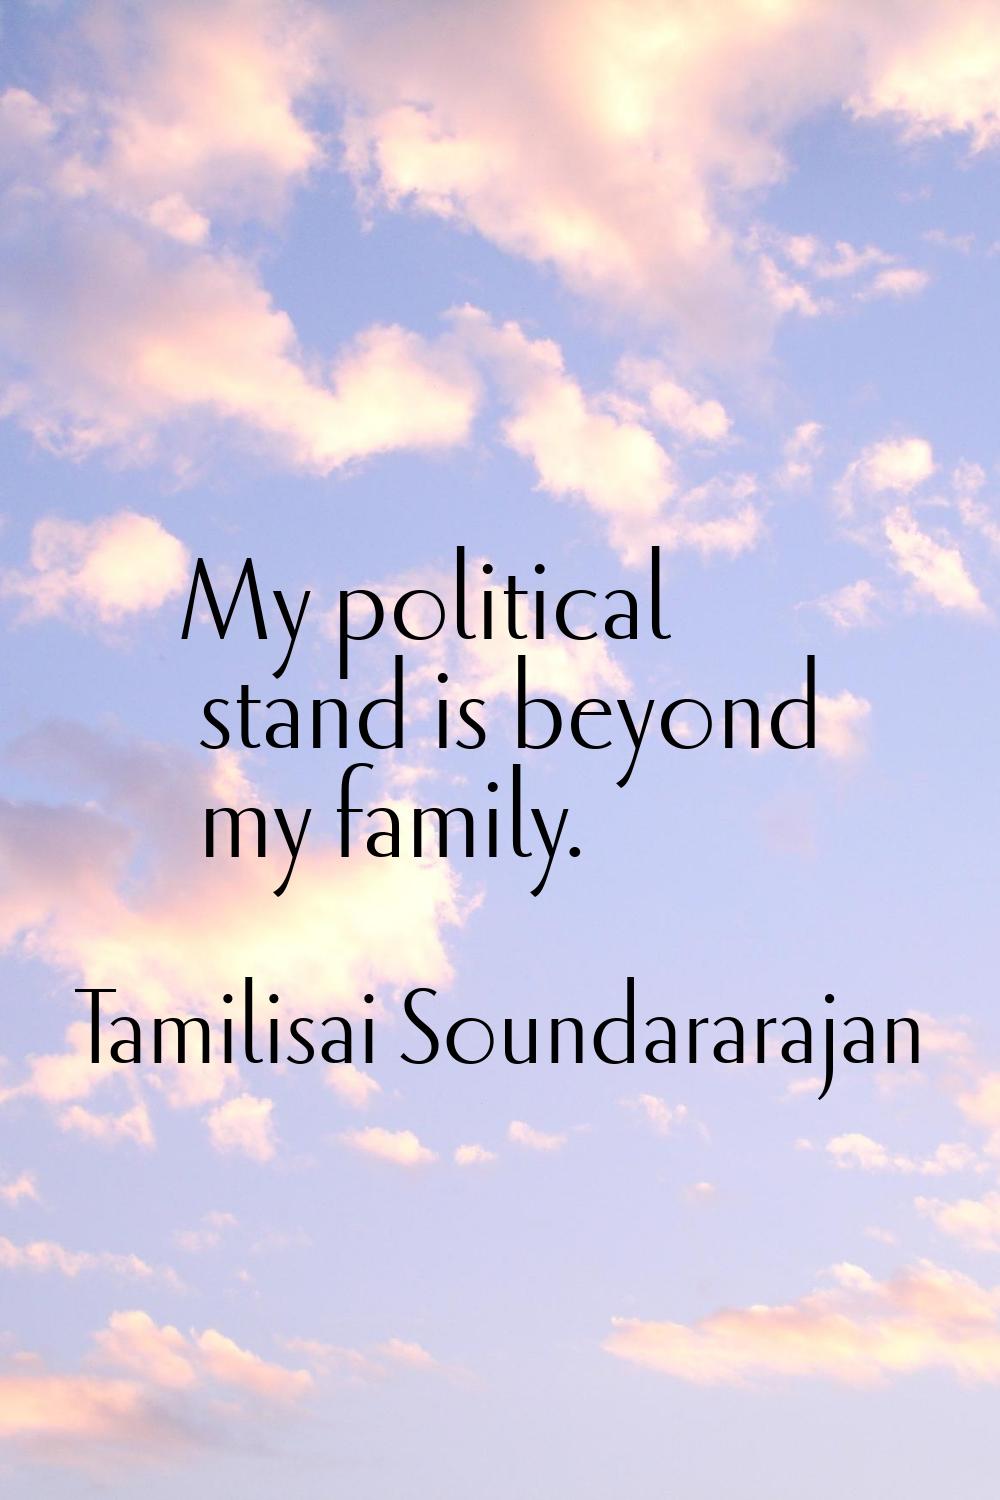 My political stand is beyond my family.